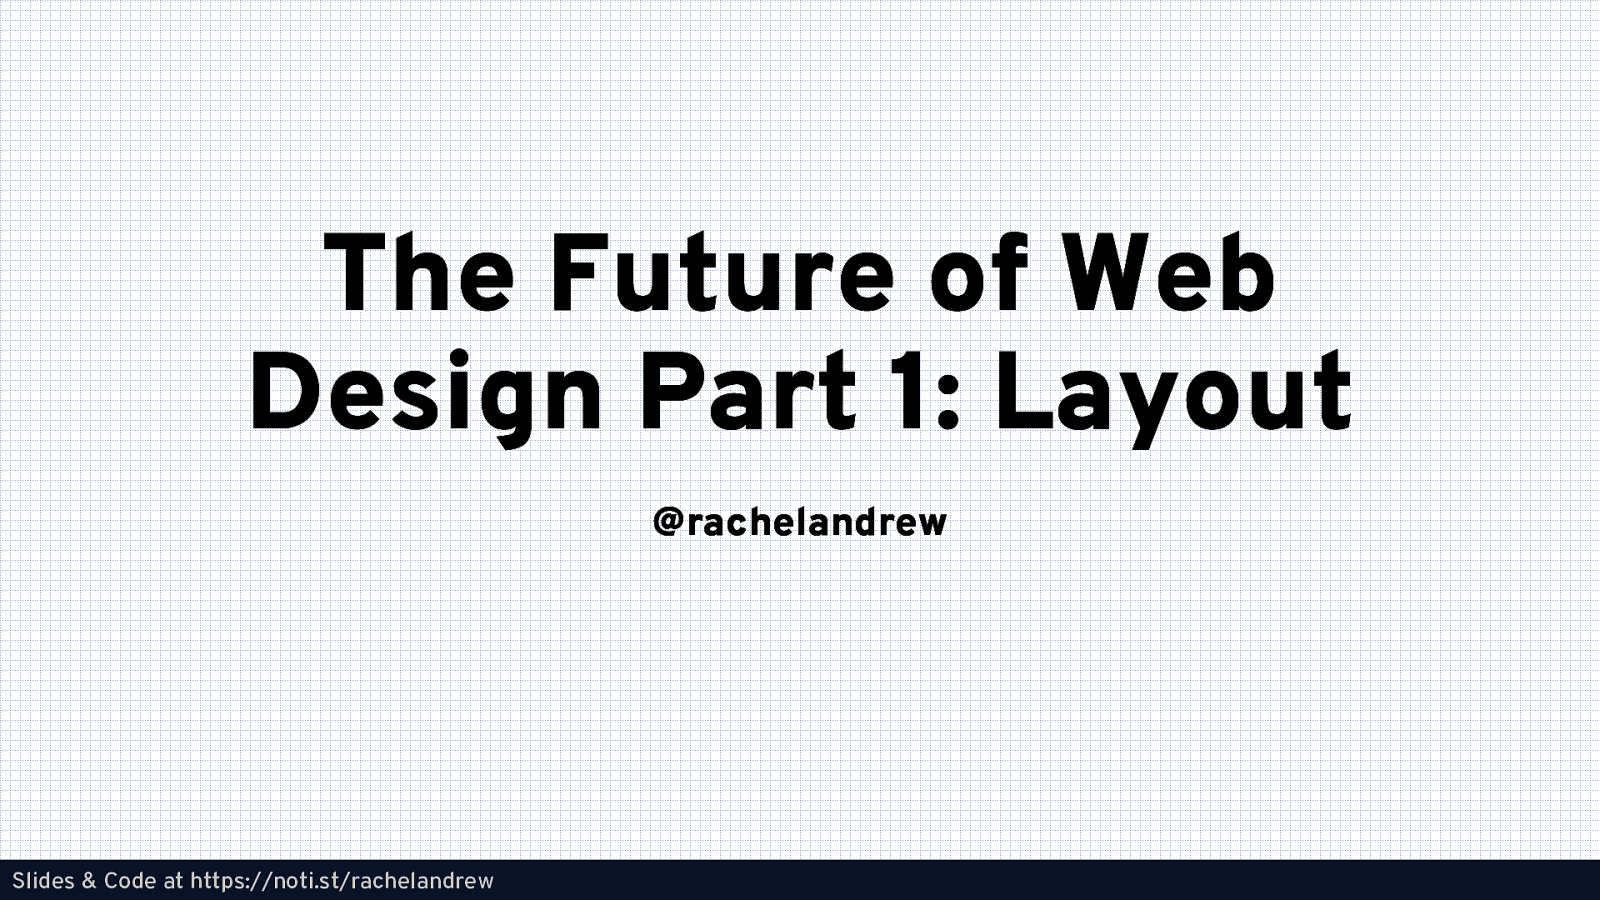 The Future of Web Design: Layout